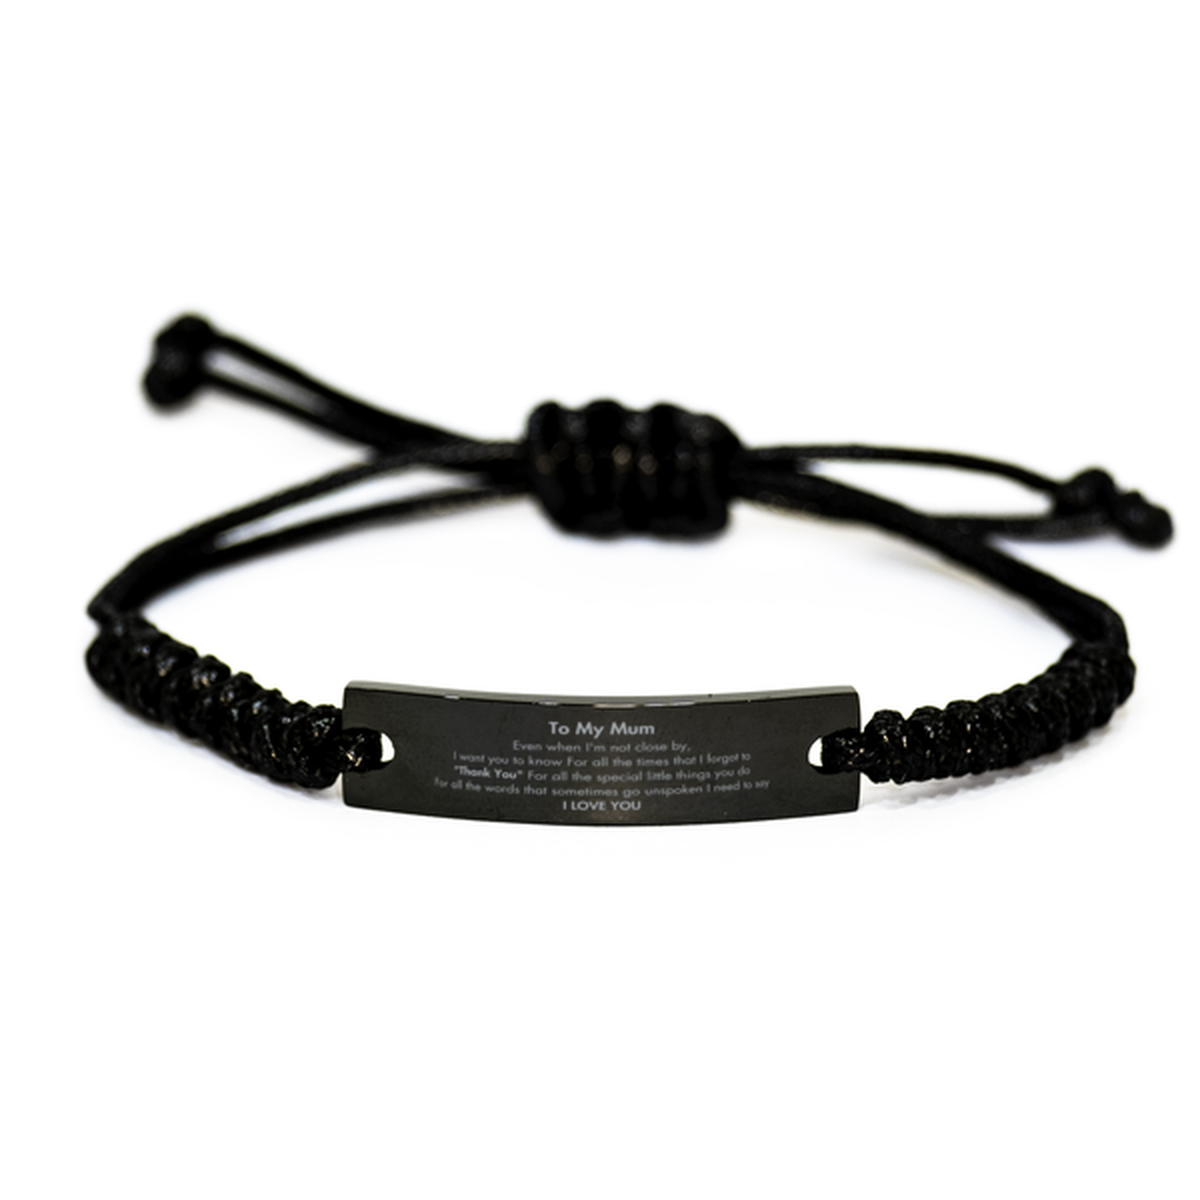 Thank You Gifts for Mum, Keepsake Black Rope Bracelet Gifts for Mum Birthday Mother's day Father's Day Mum For all the words That sometimes go unspoken I need to say I LOVE YOU